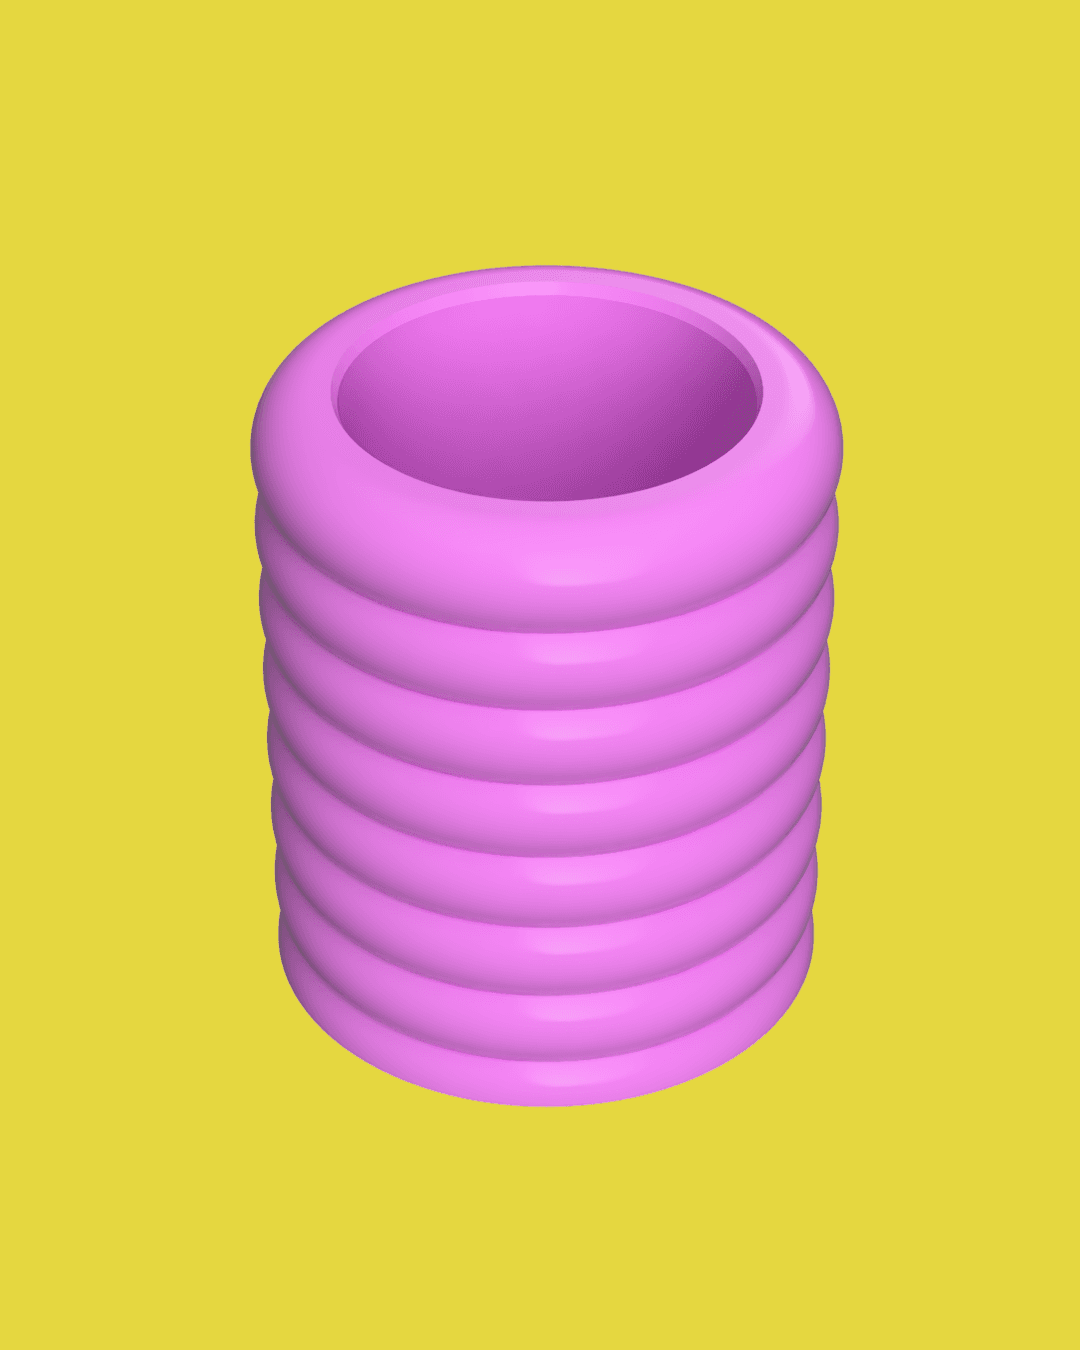 CanCup - Beach Buoy One 3d model